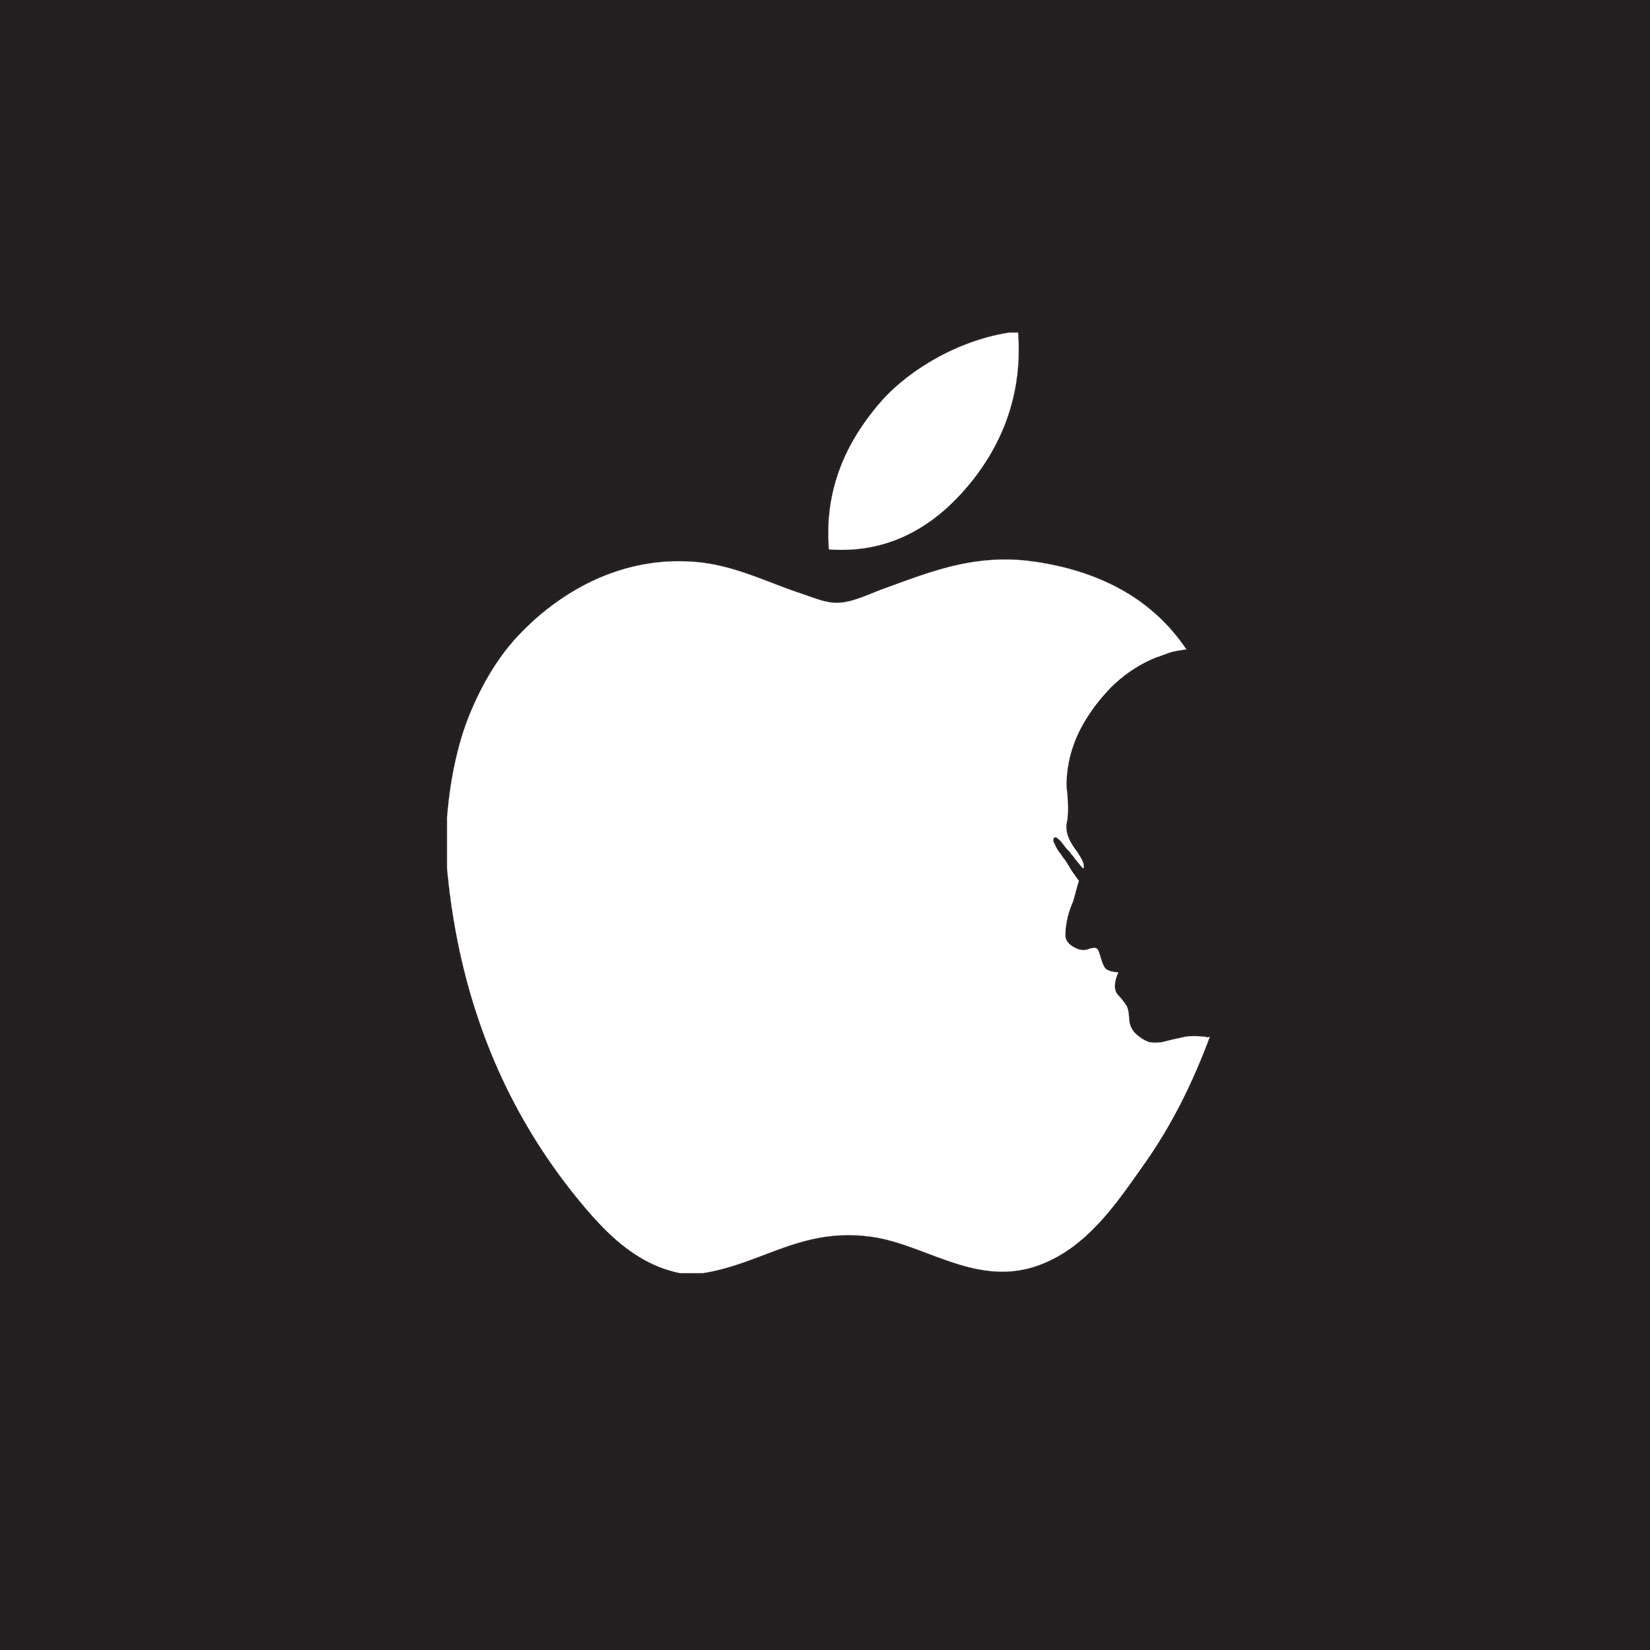 Grieving Apple fans took comfort in this tribute to Steve Jobs and turned it into a viral phenomena.